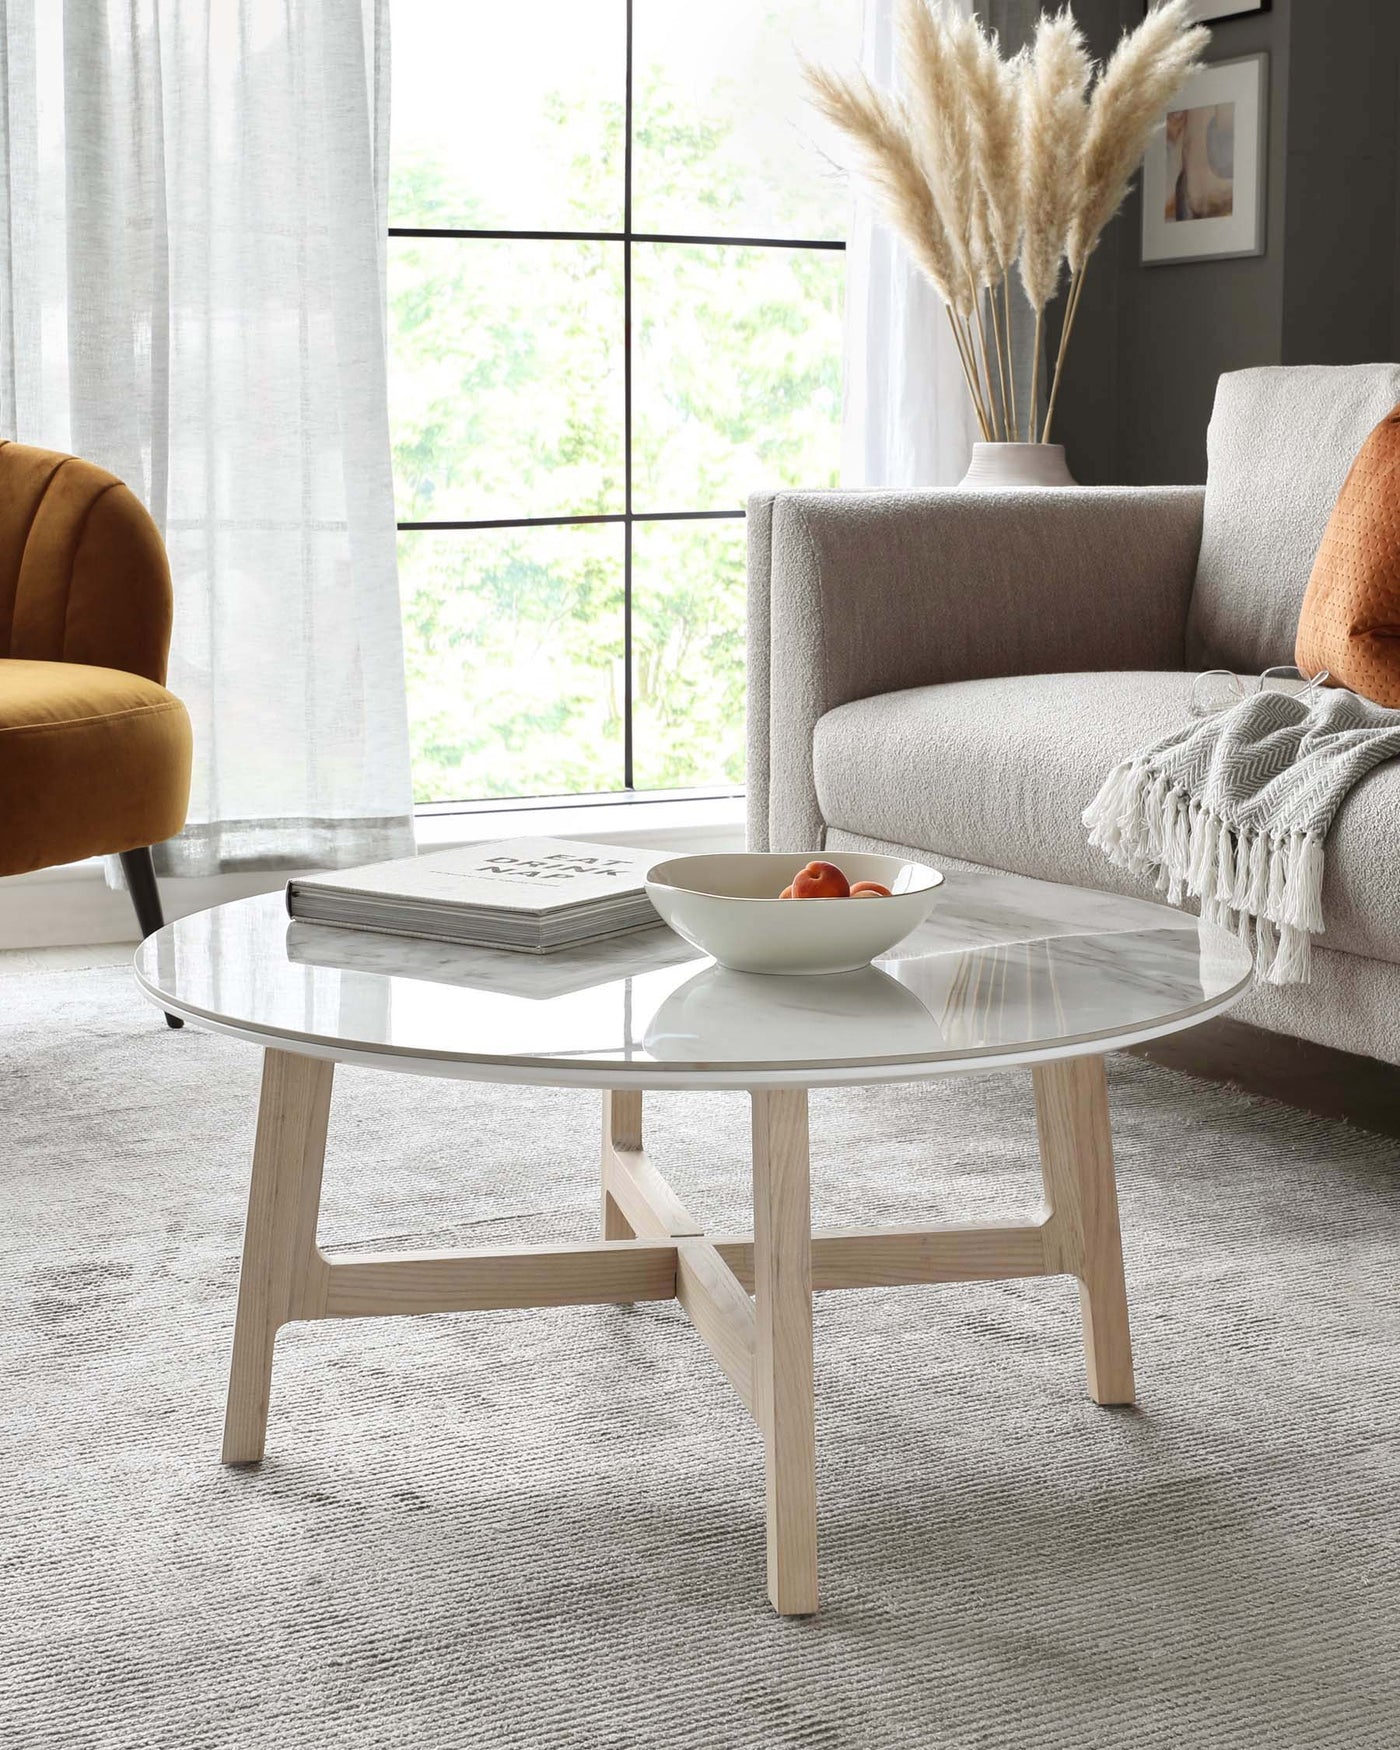 A modern round coffee table with a sleek, translucent glass top and a natural wooden base featuring angled legs. The neutral tones are complemented by a grey sofa, mustard armchair, and soft, textured throw, creating an inviting contemporary living space. A ceramic vase with dried pampas grass adds an organic touch.